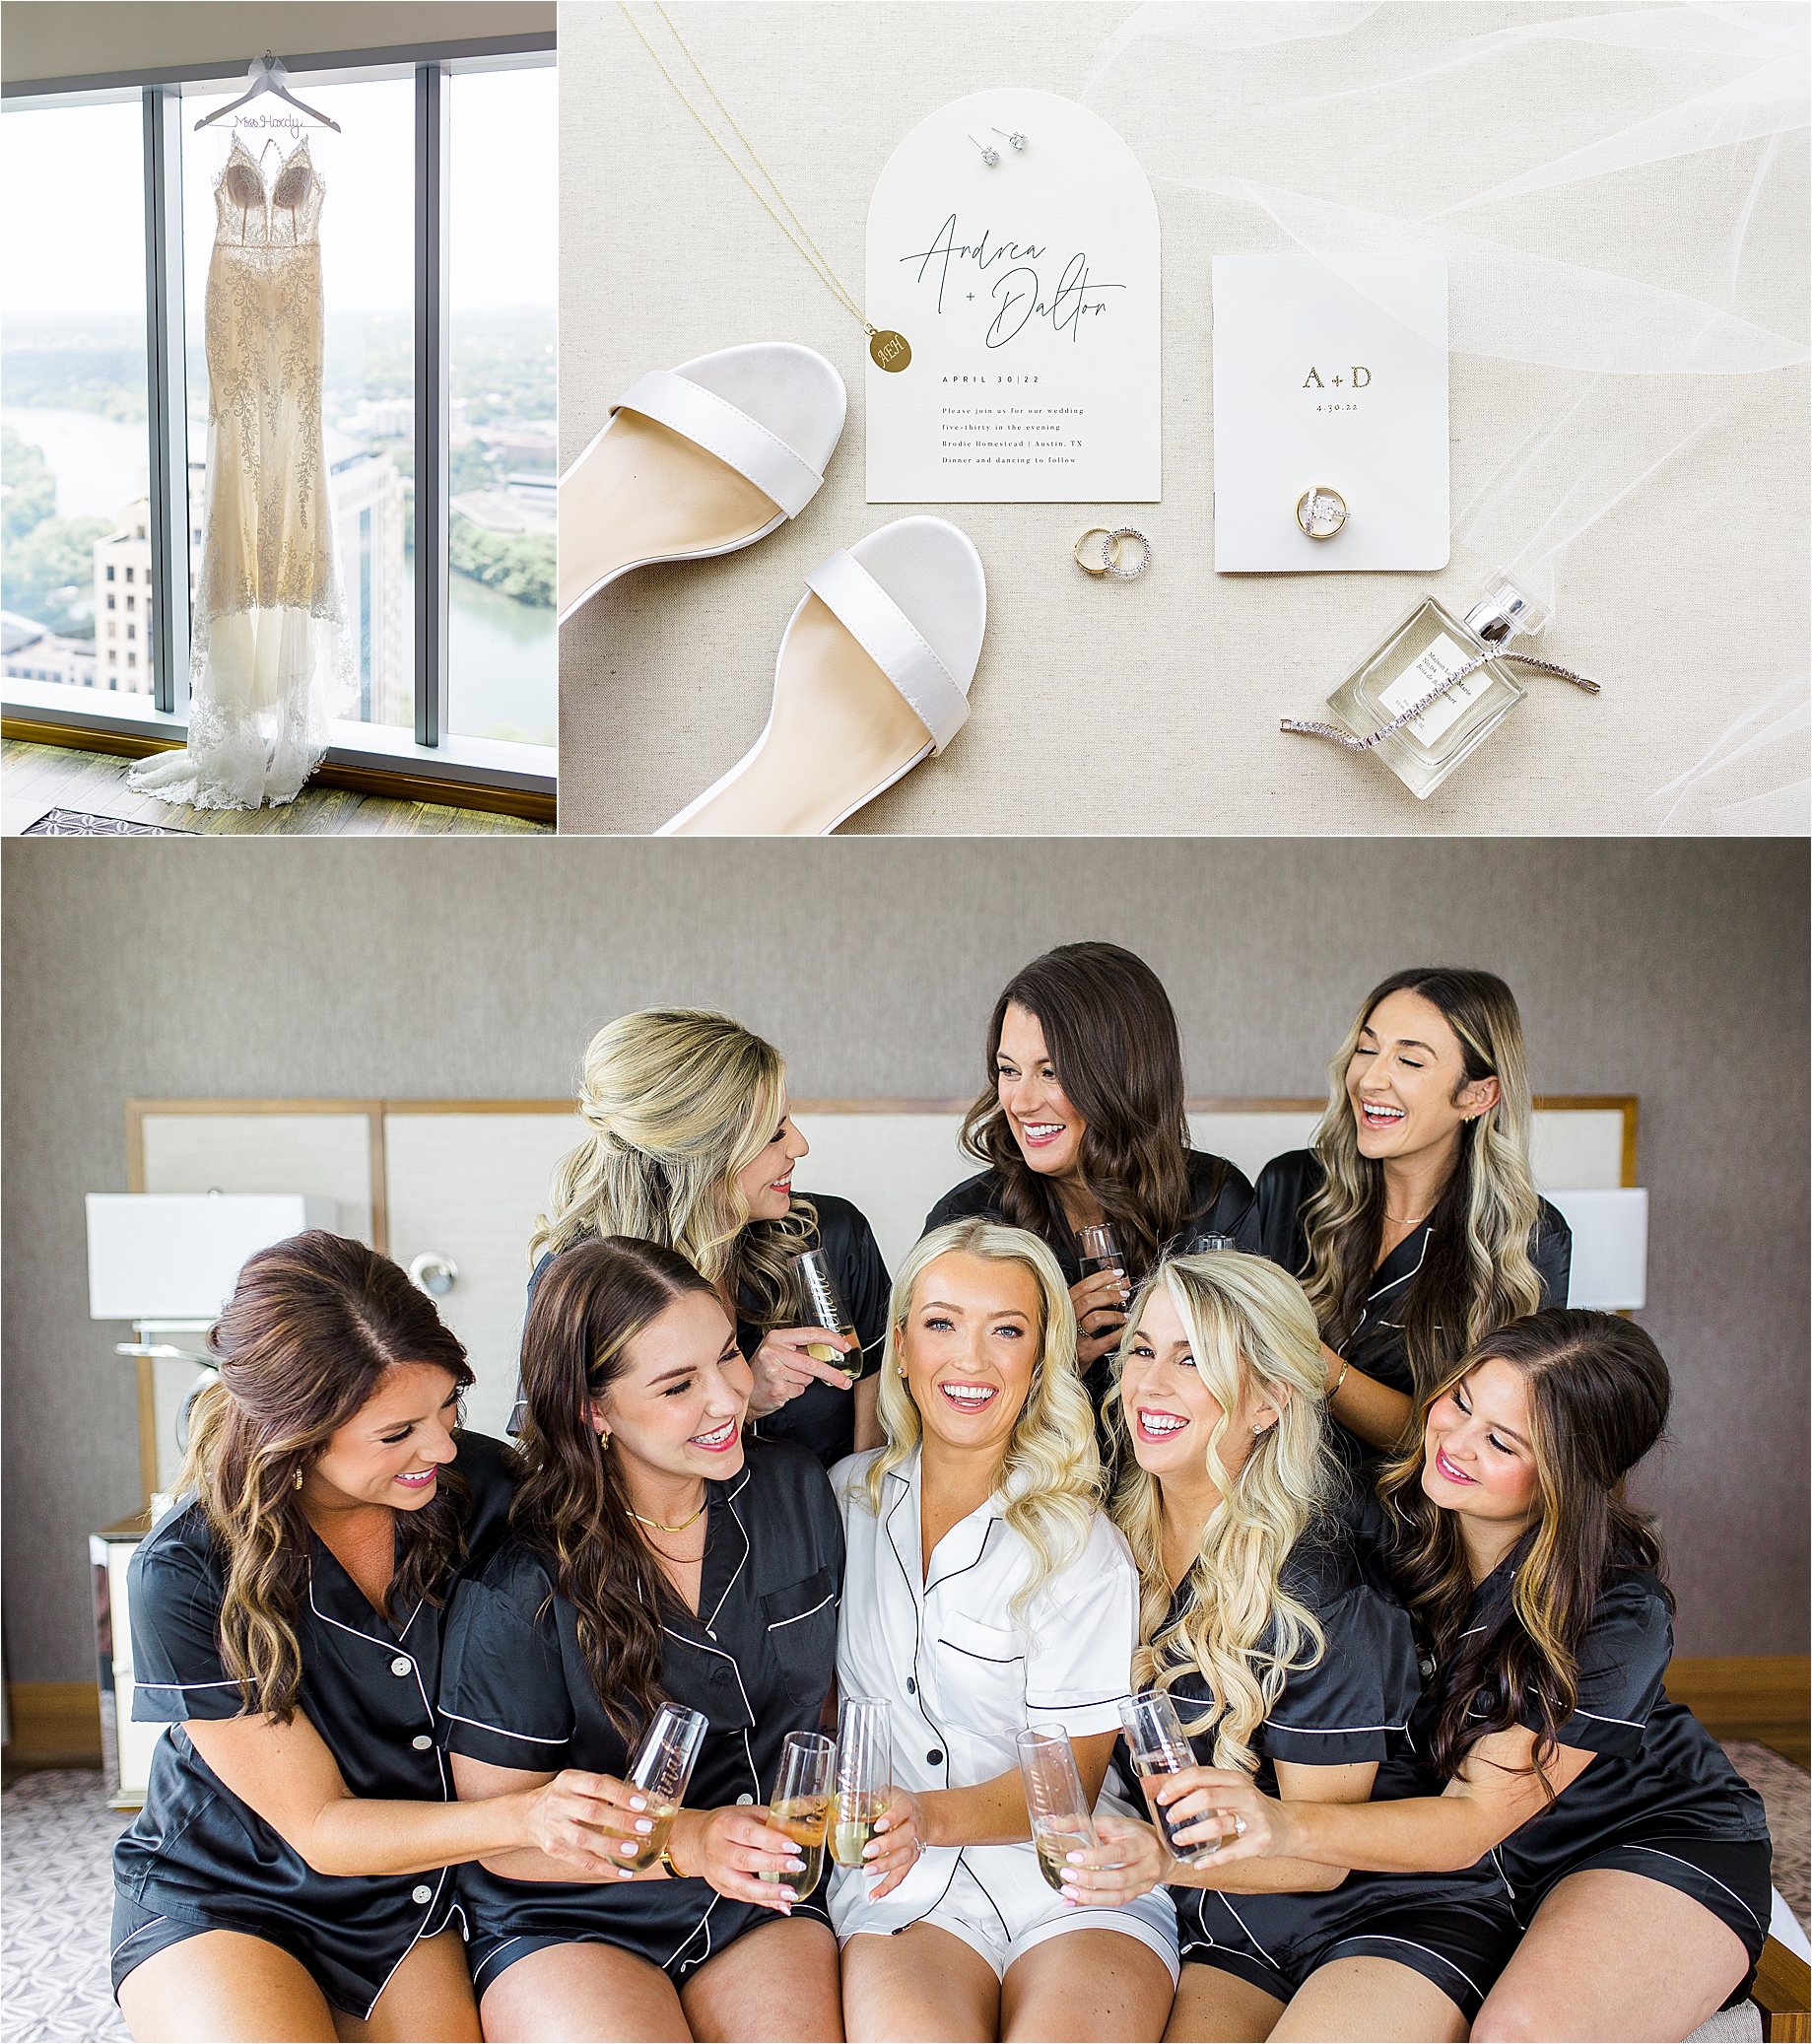 A bride and her bridesmaids in black pjs share a toast on a hotel bed at JW Marriott in Austin, Texas on her wedding day.